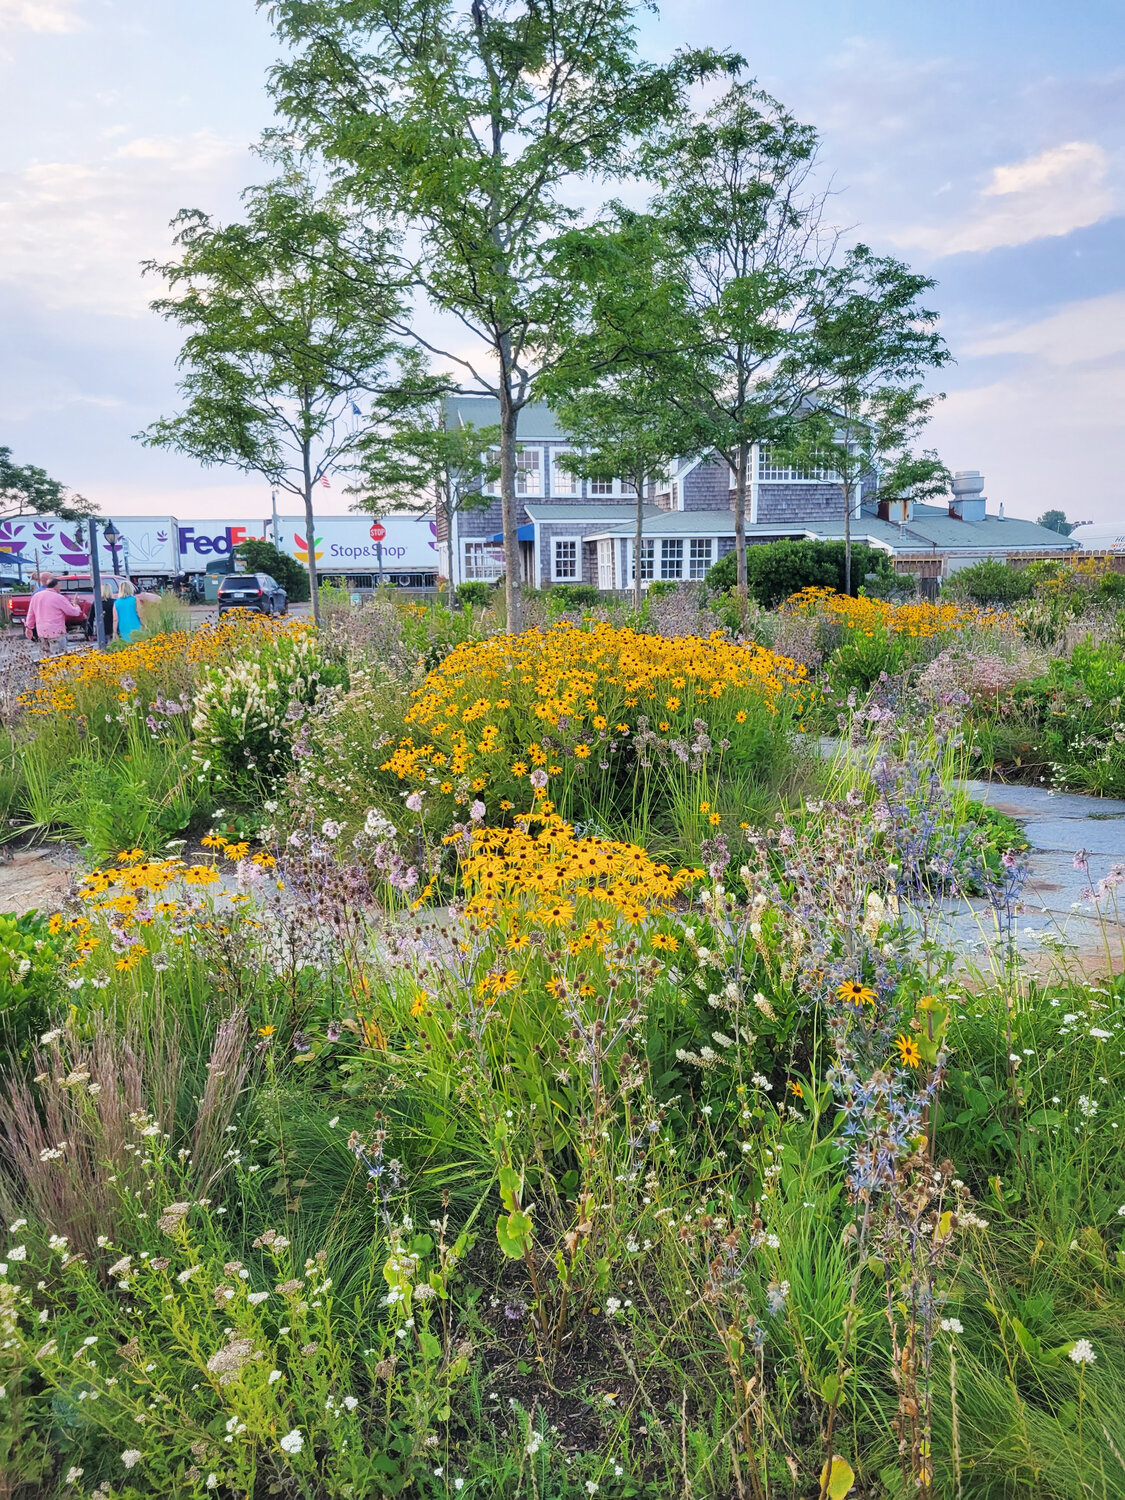 Native black-eyed Susans and sea lavender mixed with other plants in the Land Bank’s Easy Street park overlooking Nantucket Harbor.